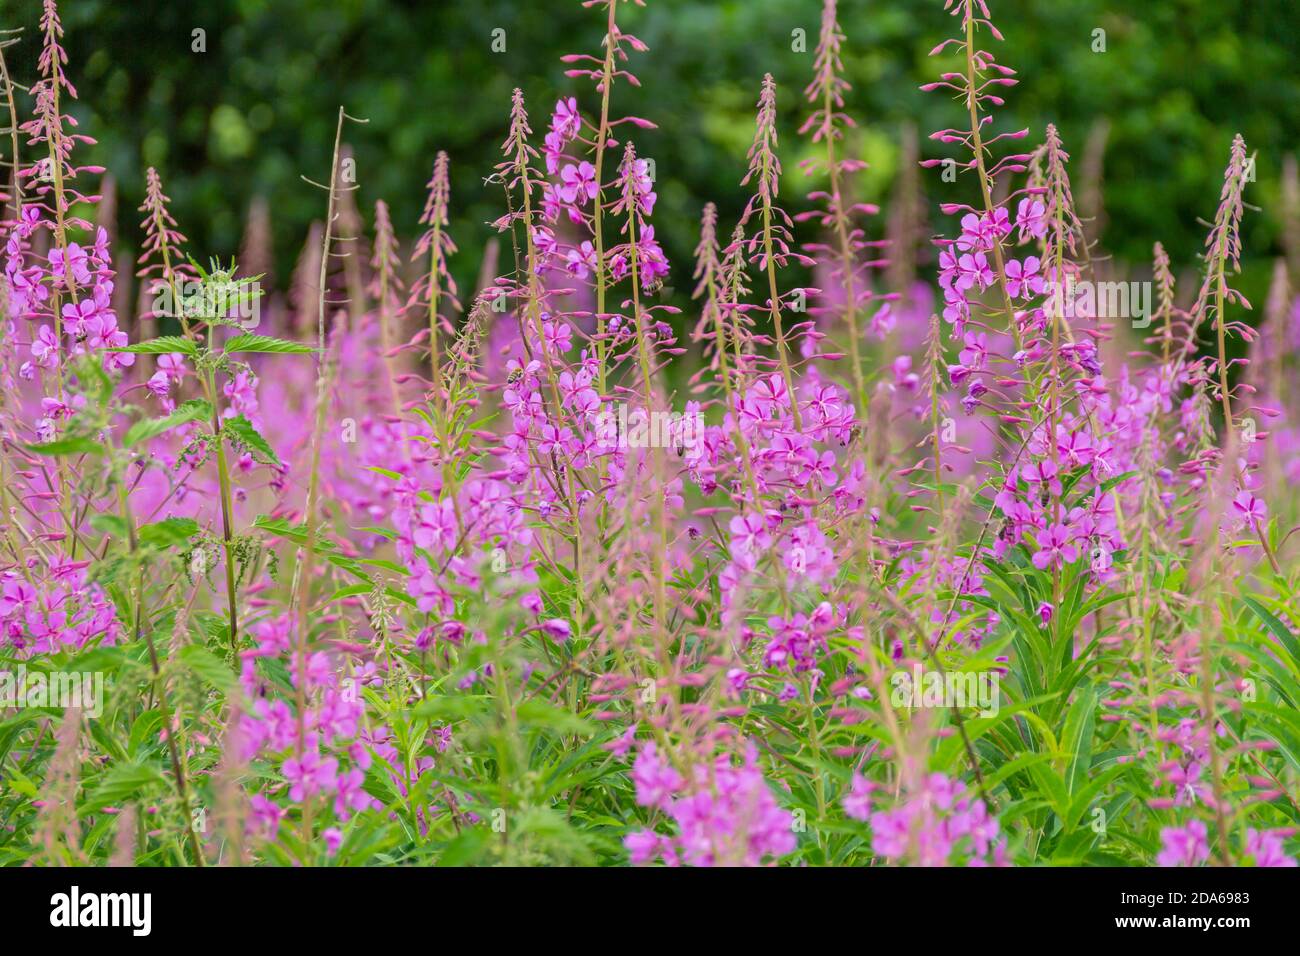 lots of pink flowers in natural ambiance Stock Photo